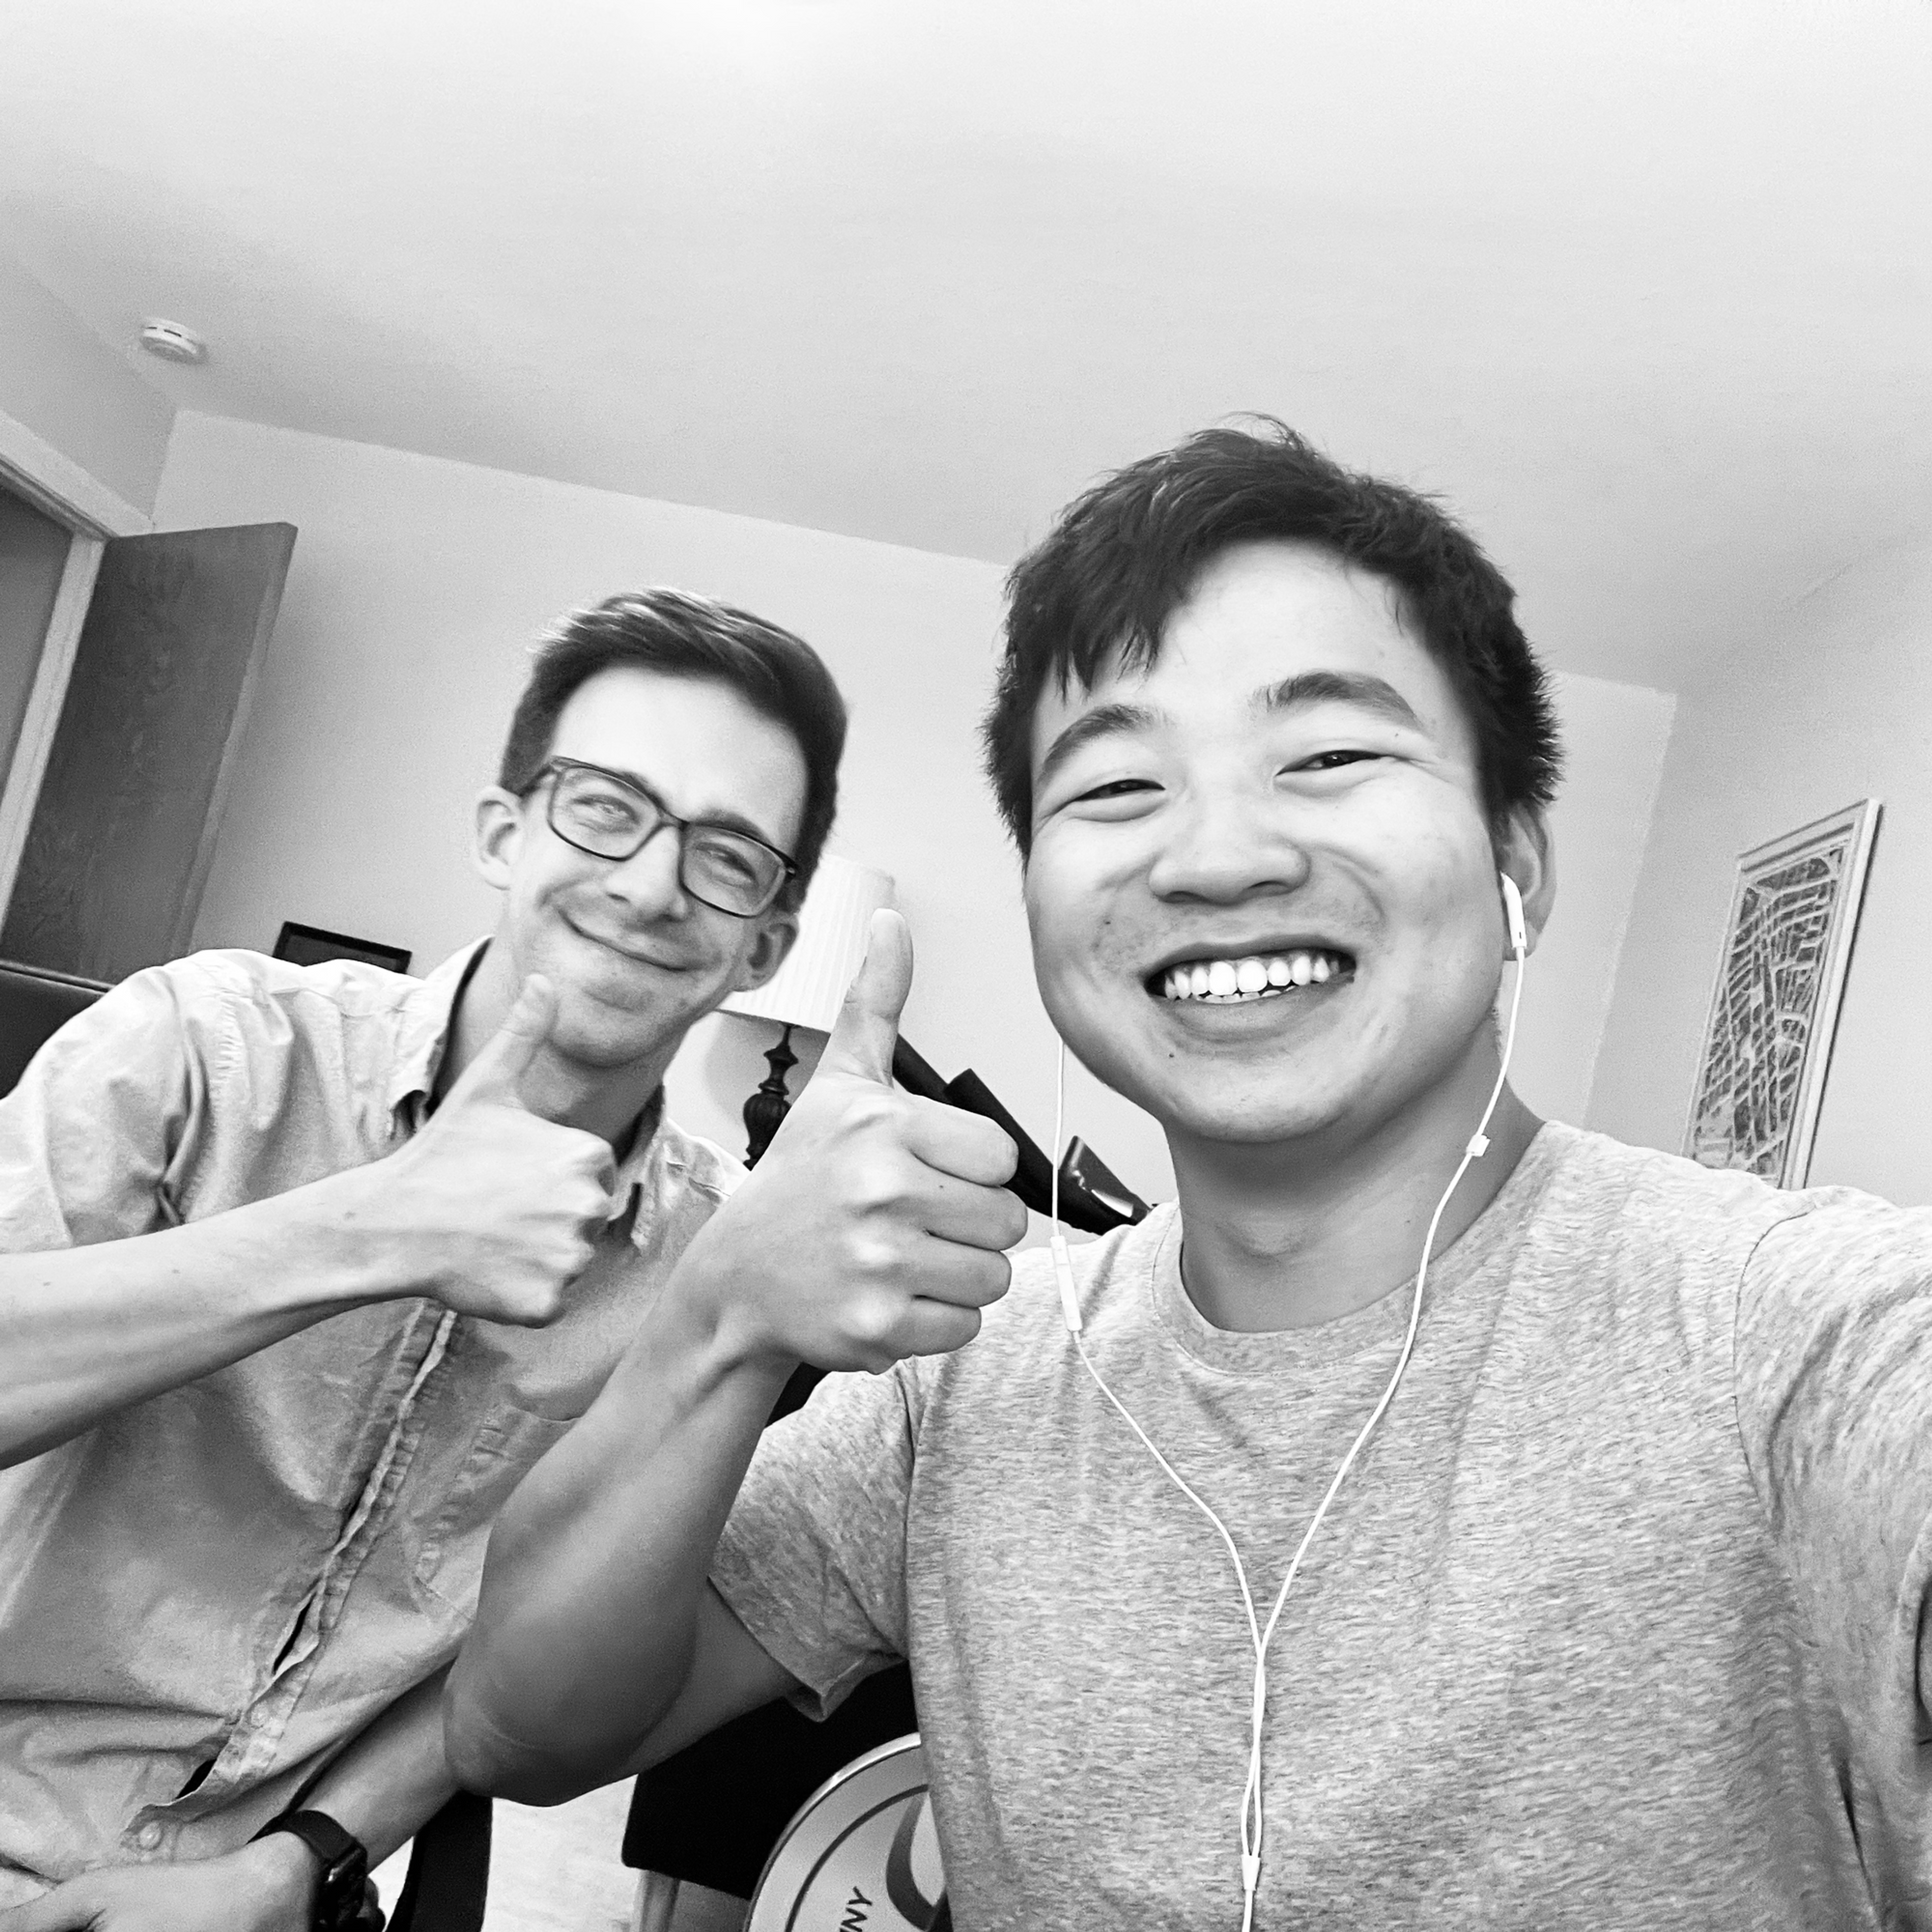 Founder, Noah and Yuxin first met in 2011 when they were both freshmen studying Computer Science at UC Berkeley. They lived in the same dorm and were project partners all through college.